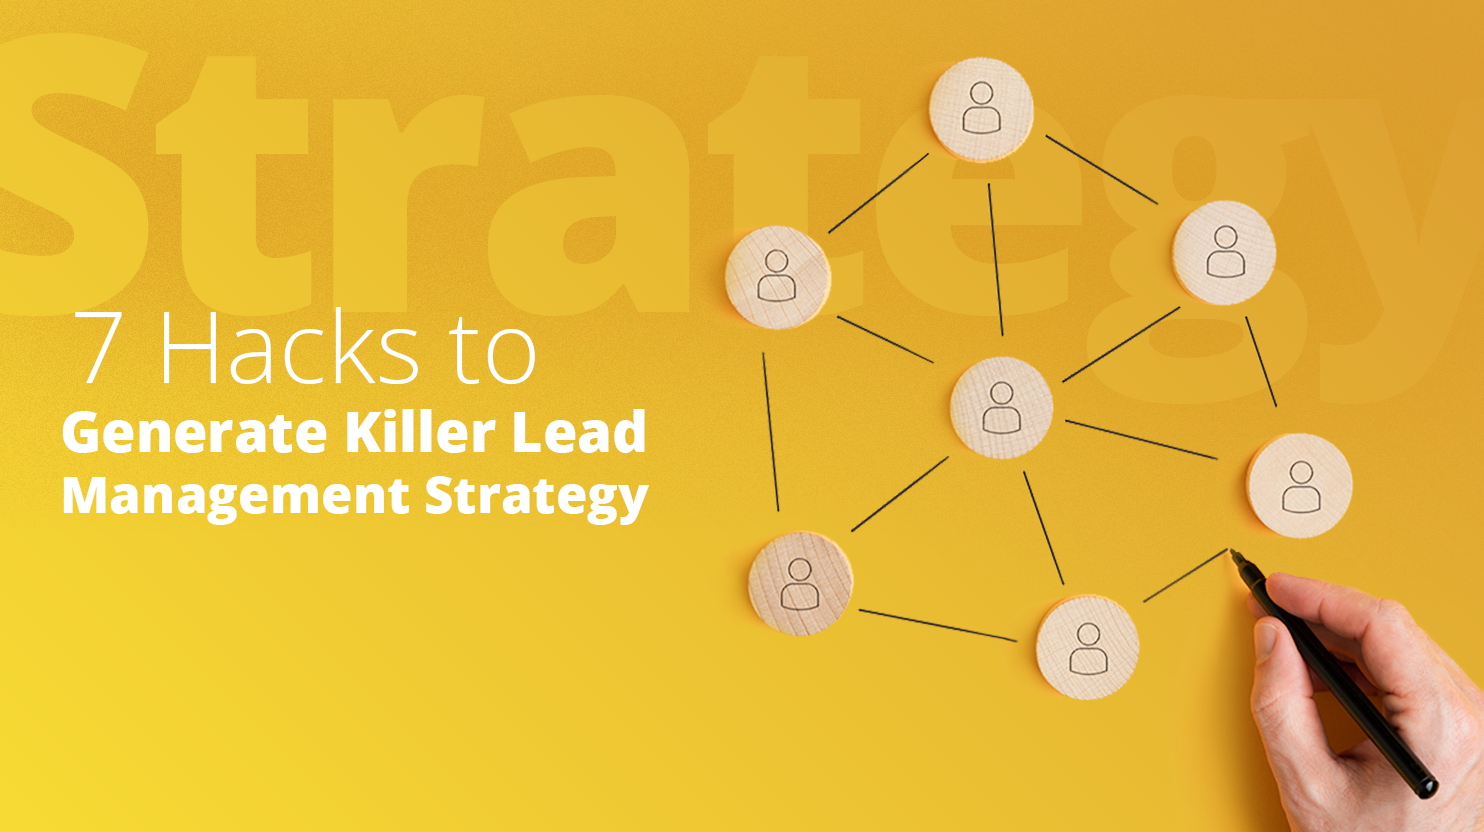 Image reads: 7 hacks to generate killer lead management strategy